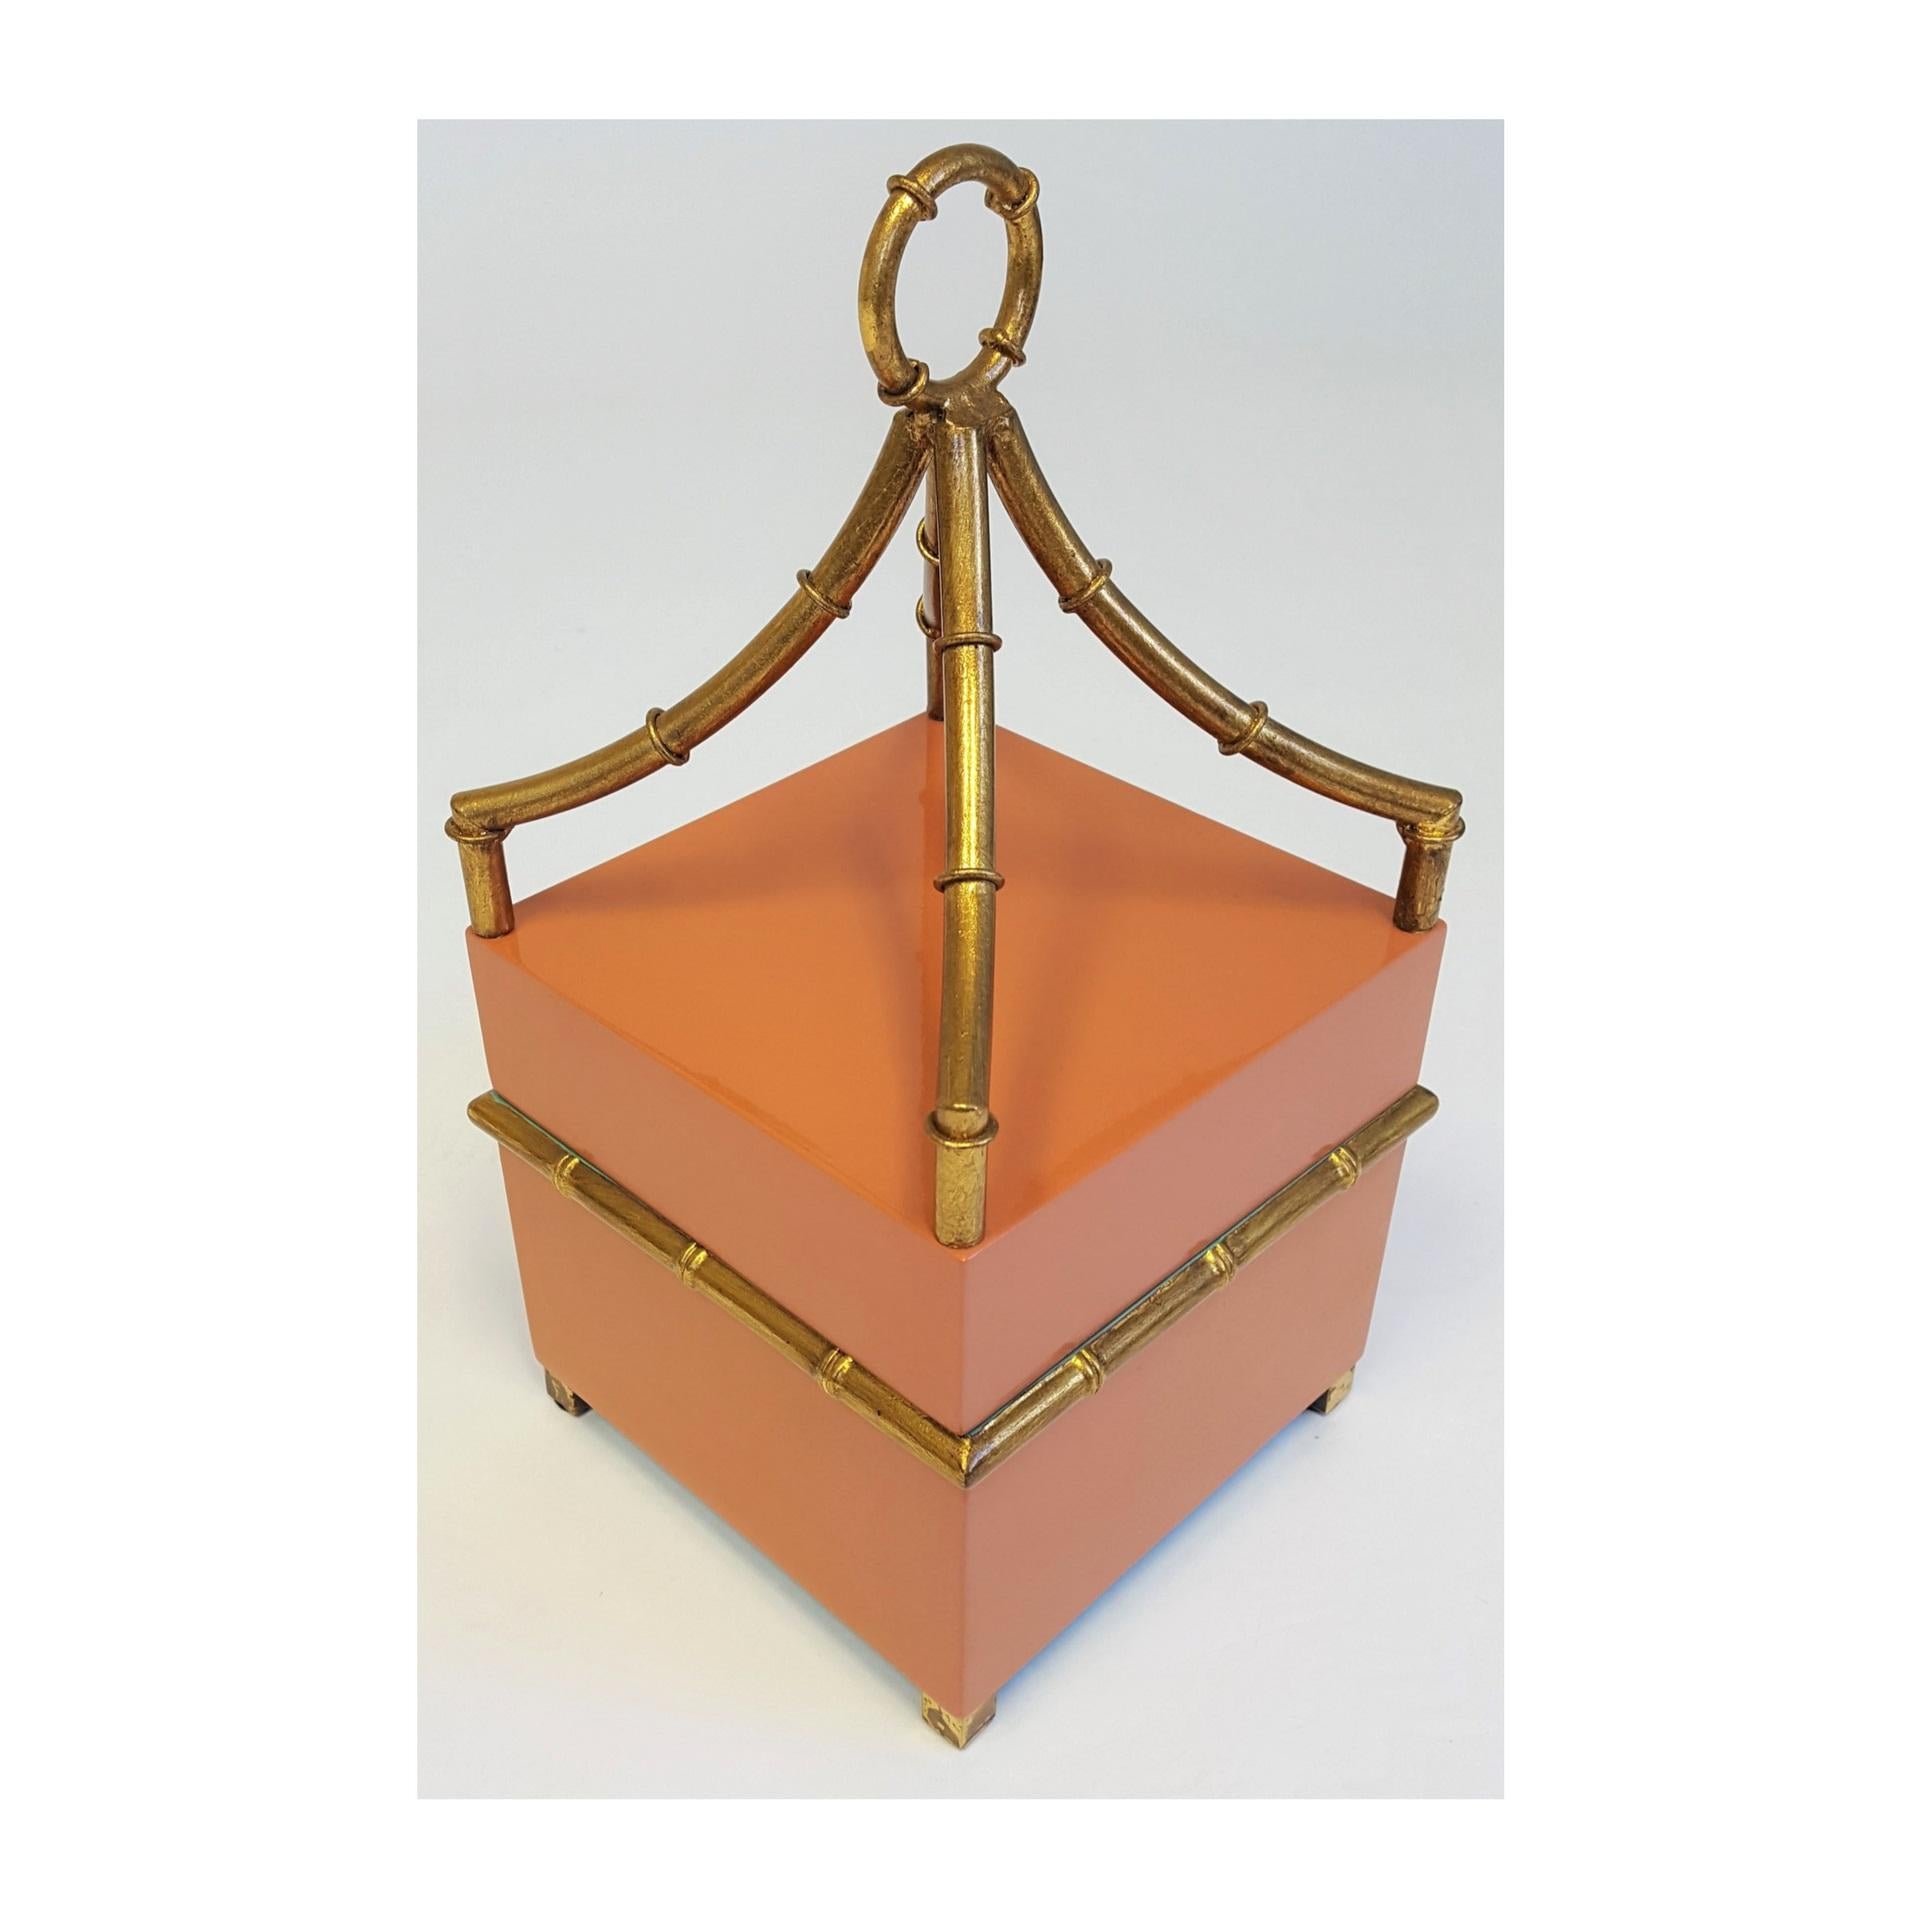 Beautiful decorative box that would be a statement on a bookshelf, console or coffee table. Orange with gold finish on bamboo detail and aqua on the inside. Made by Chelsea House, a NC manufacturer of high-end accessories, lighting and furniture.